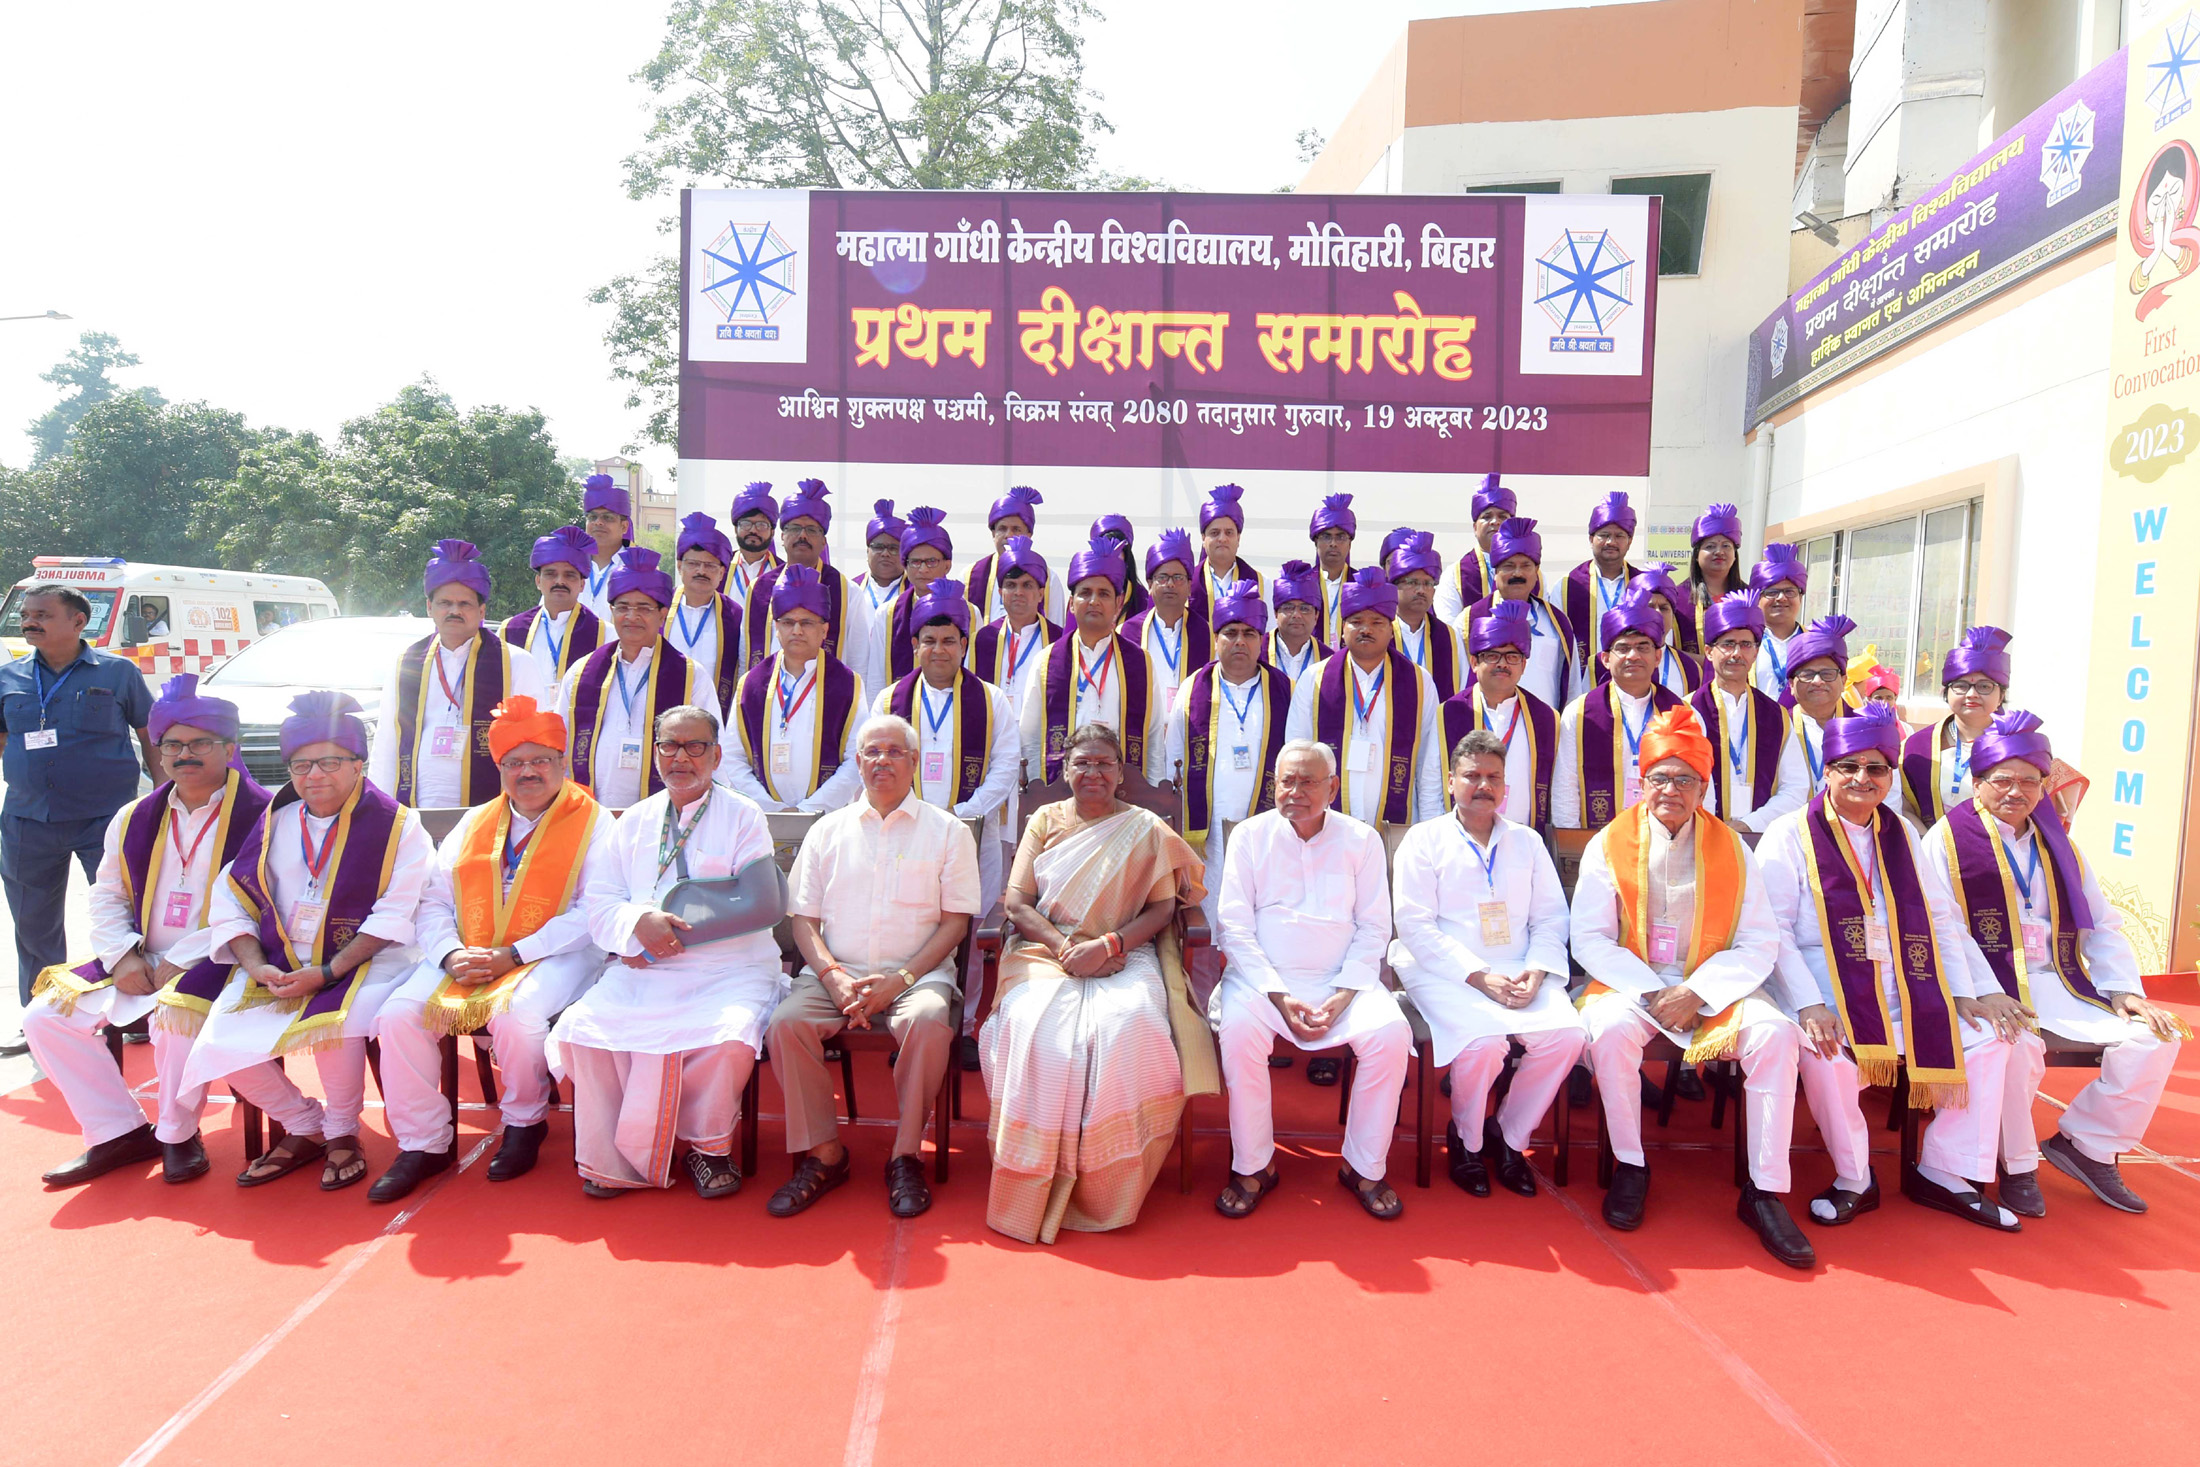 The President of India, Smt. Droupadi Murmu in a group photograph at the first convocation of Mahatma Gandhi Central University at Motihari, in Bihar